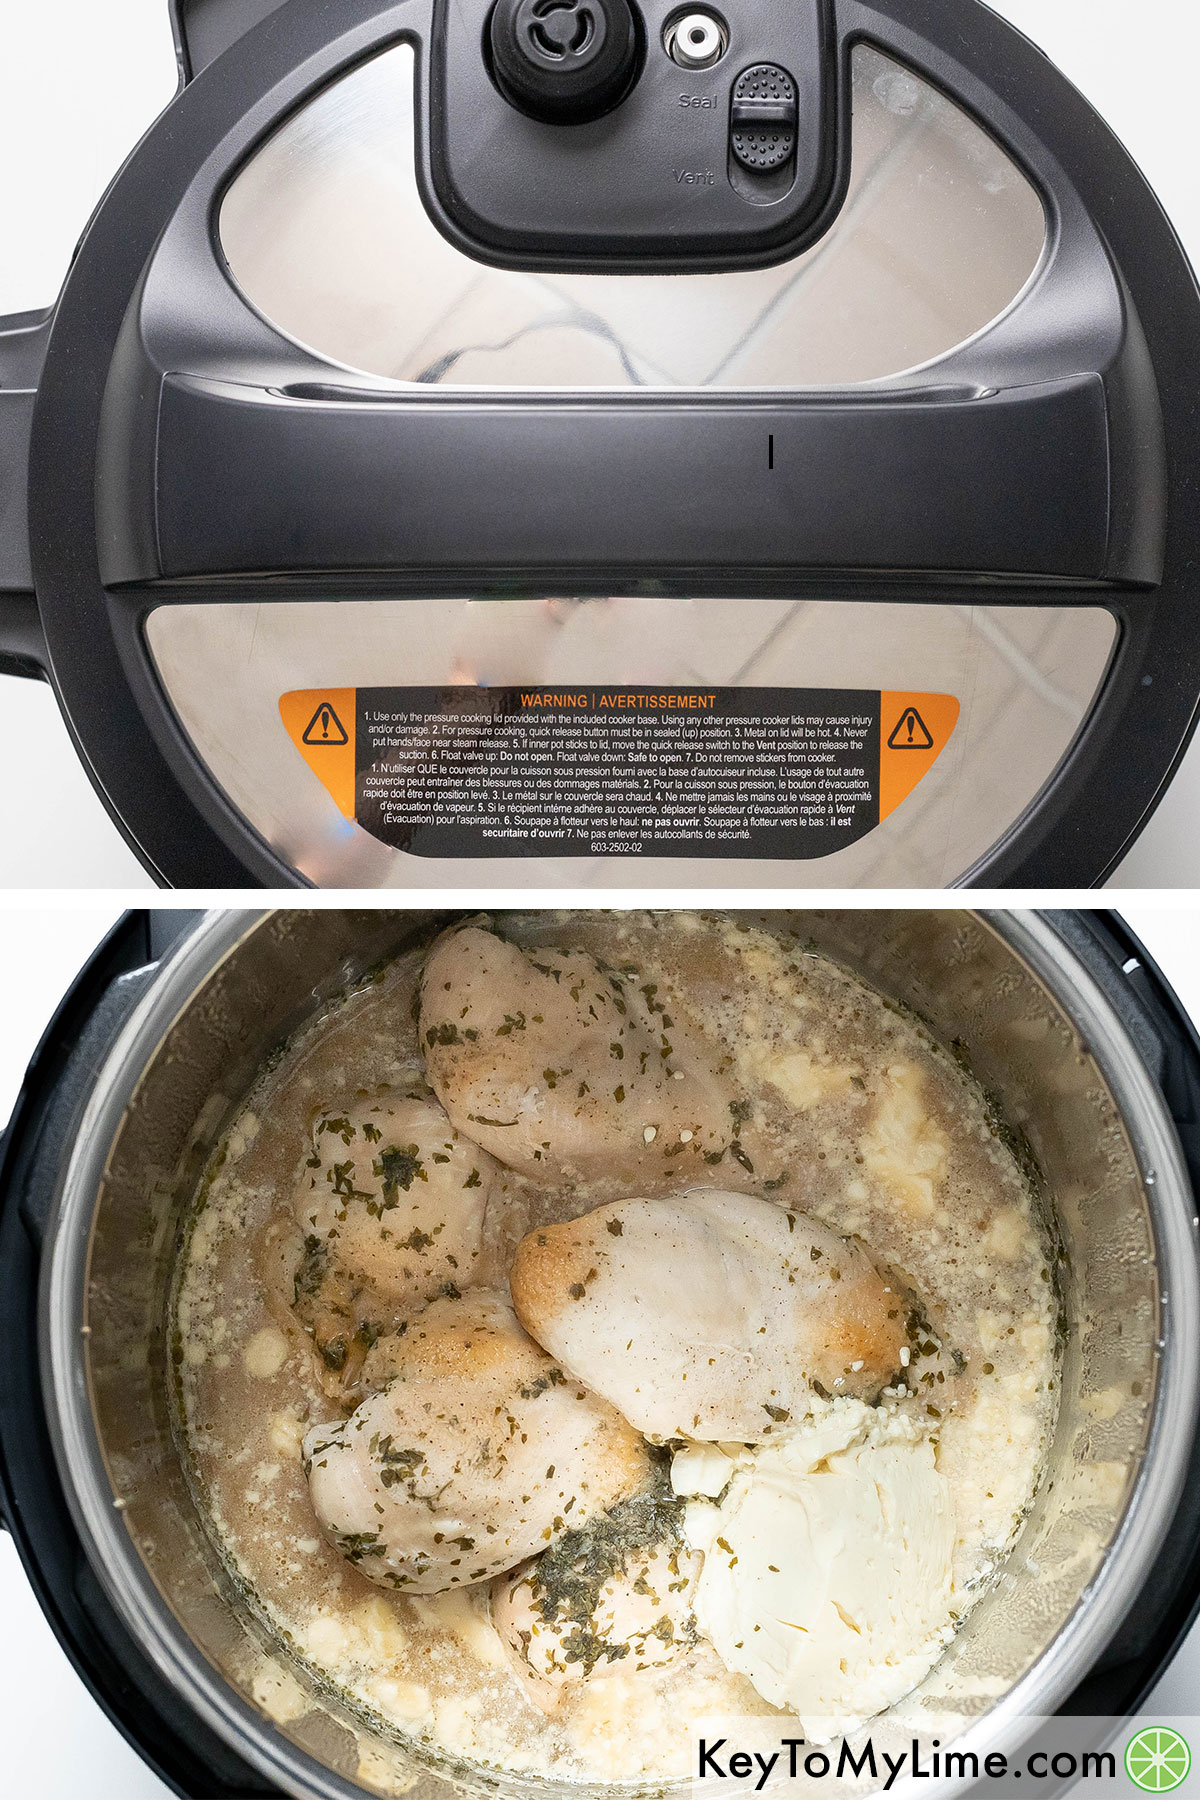 Put the lid on the Instant Pot and cook until the chicken is cooked through.